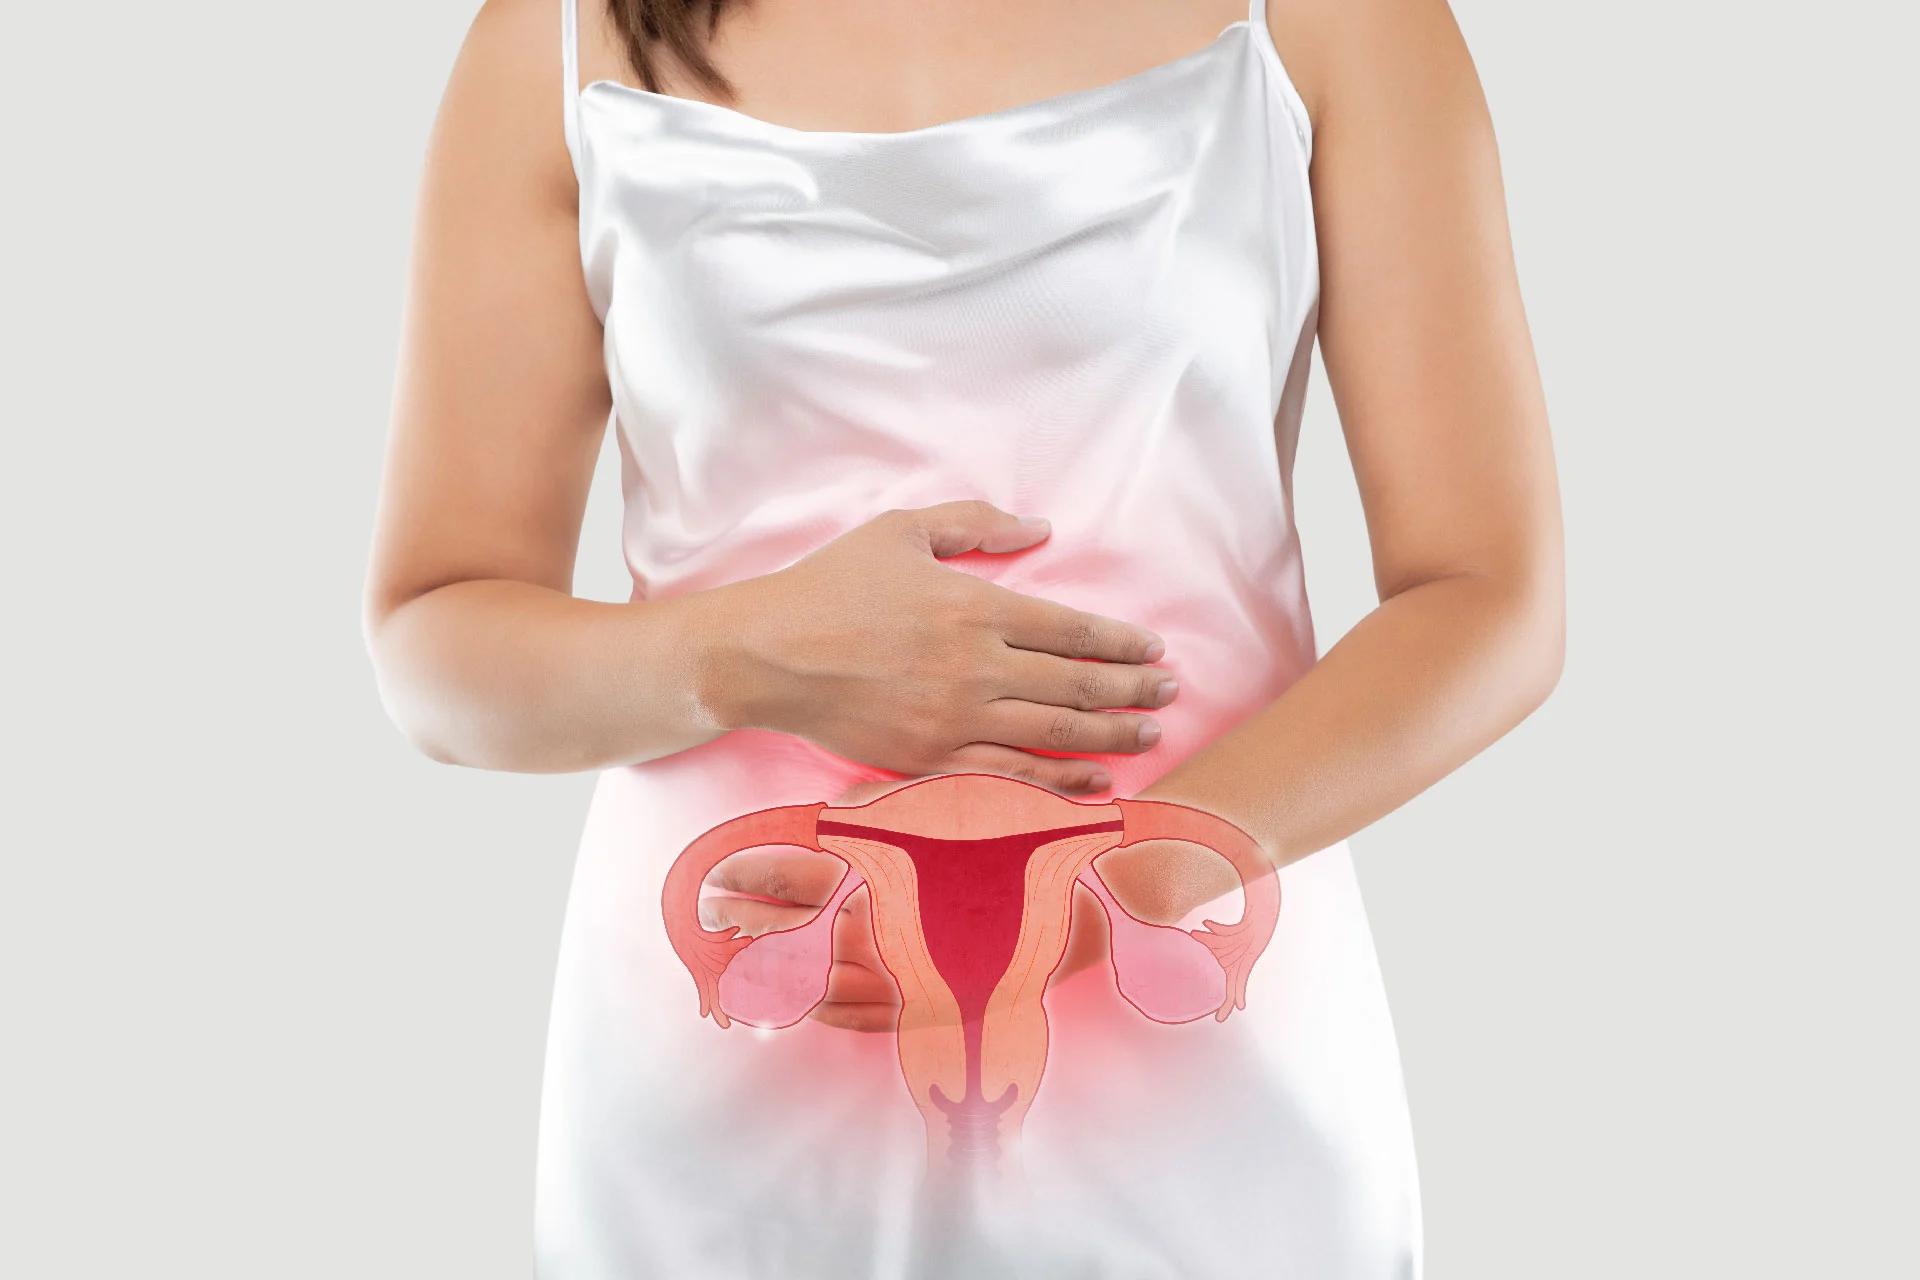 Top 10 Home Remedies to Manage PCOS Permanently